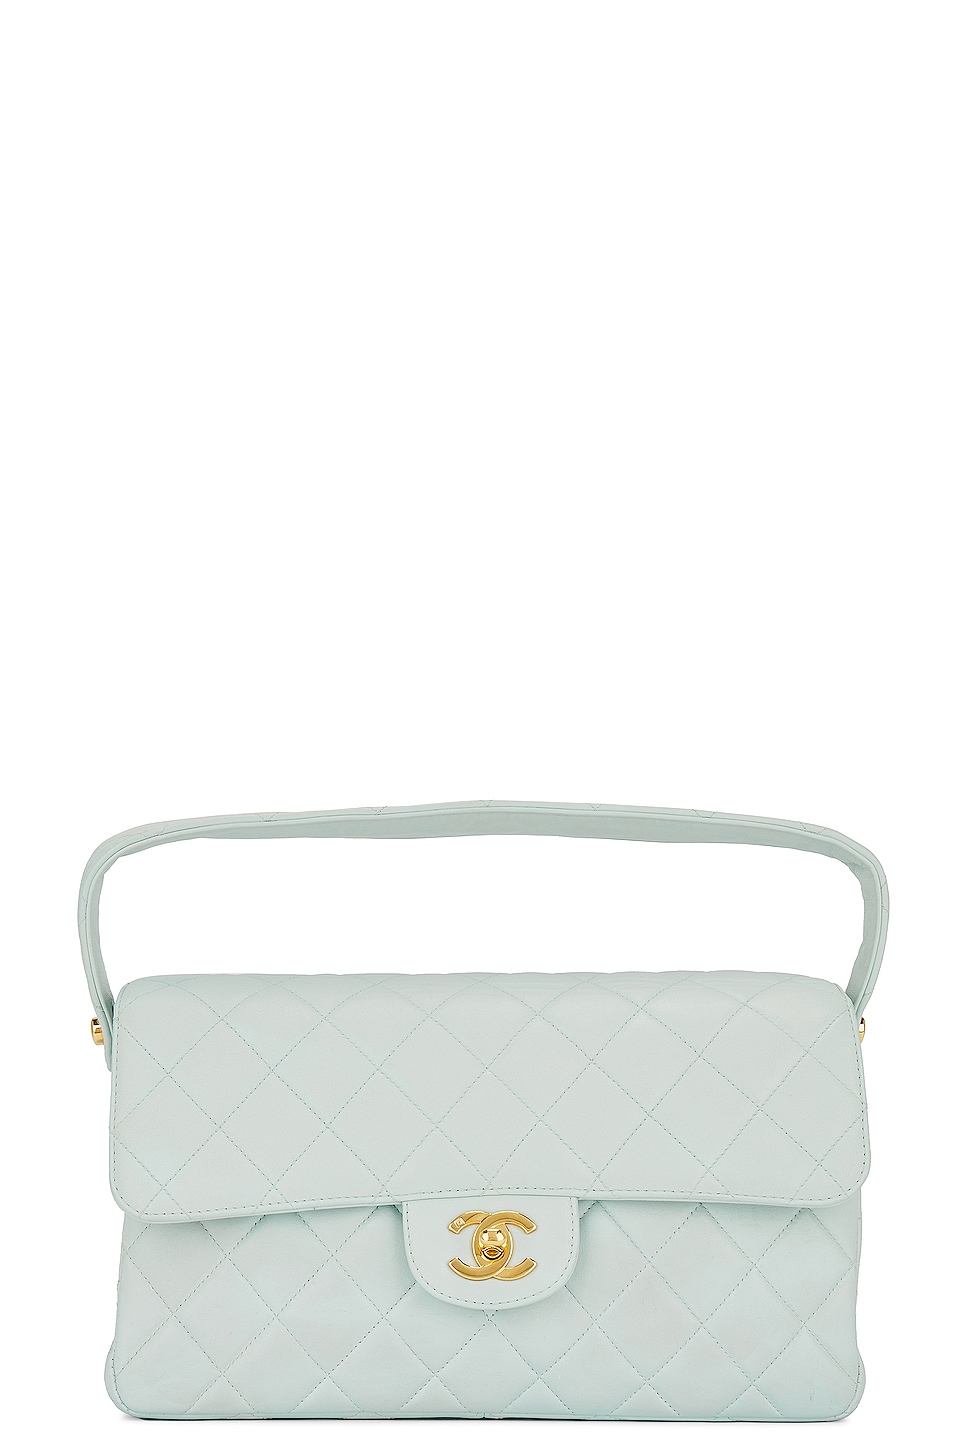 Coco Mark Quilted Lambskin Doubleflap Handbag in Mint